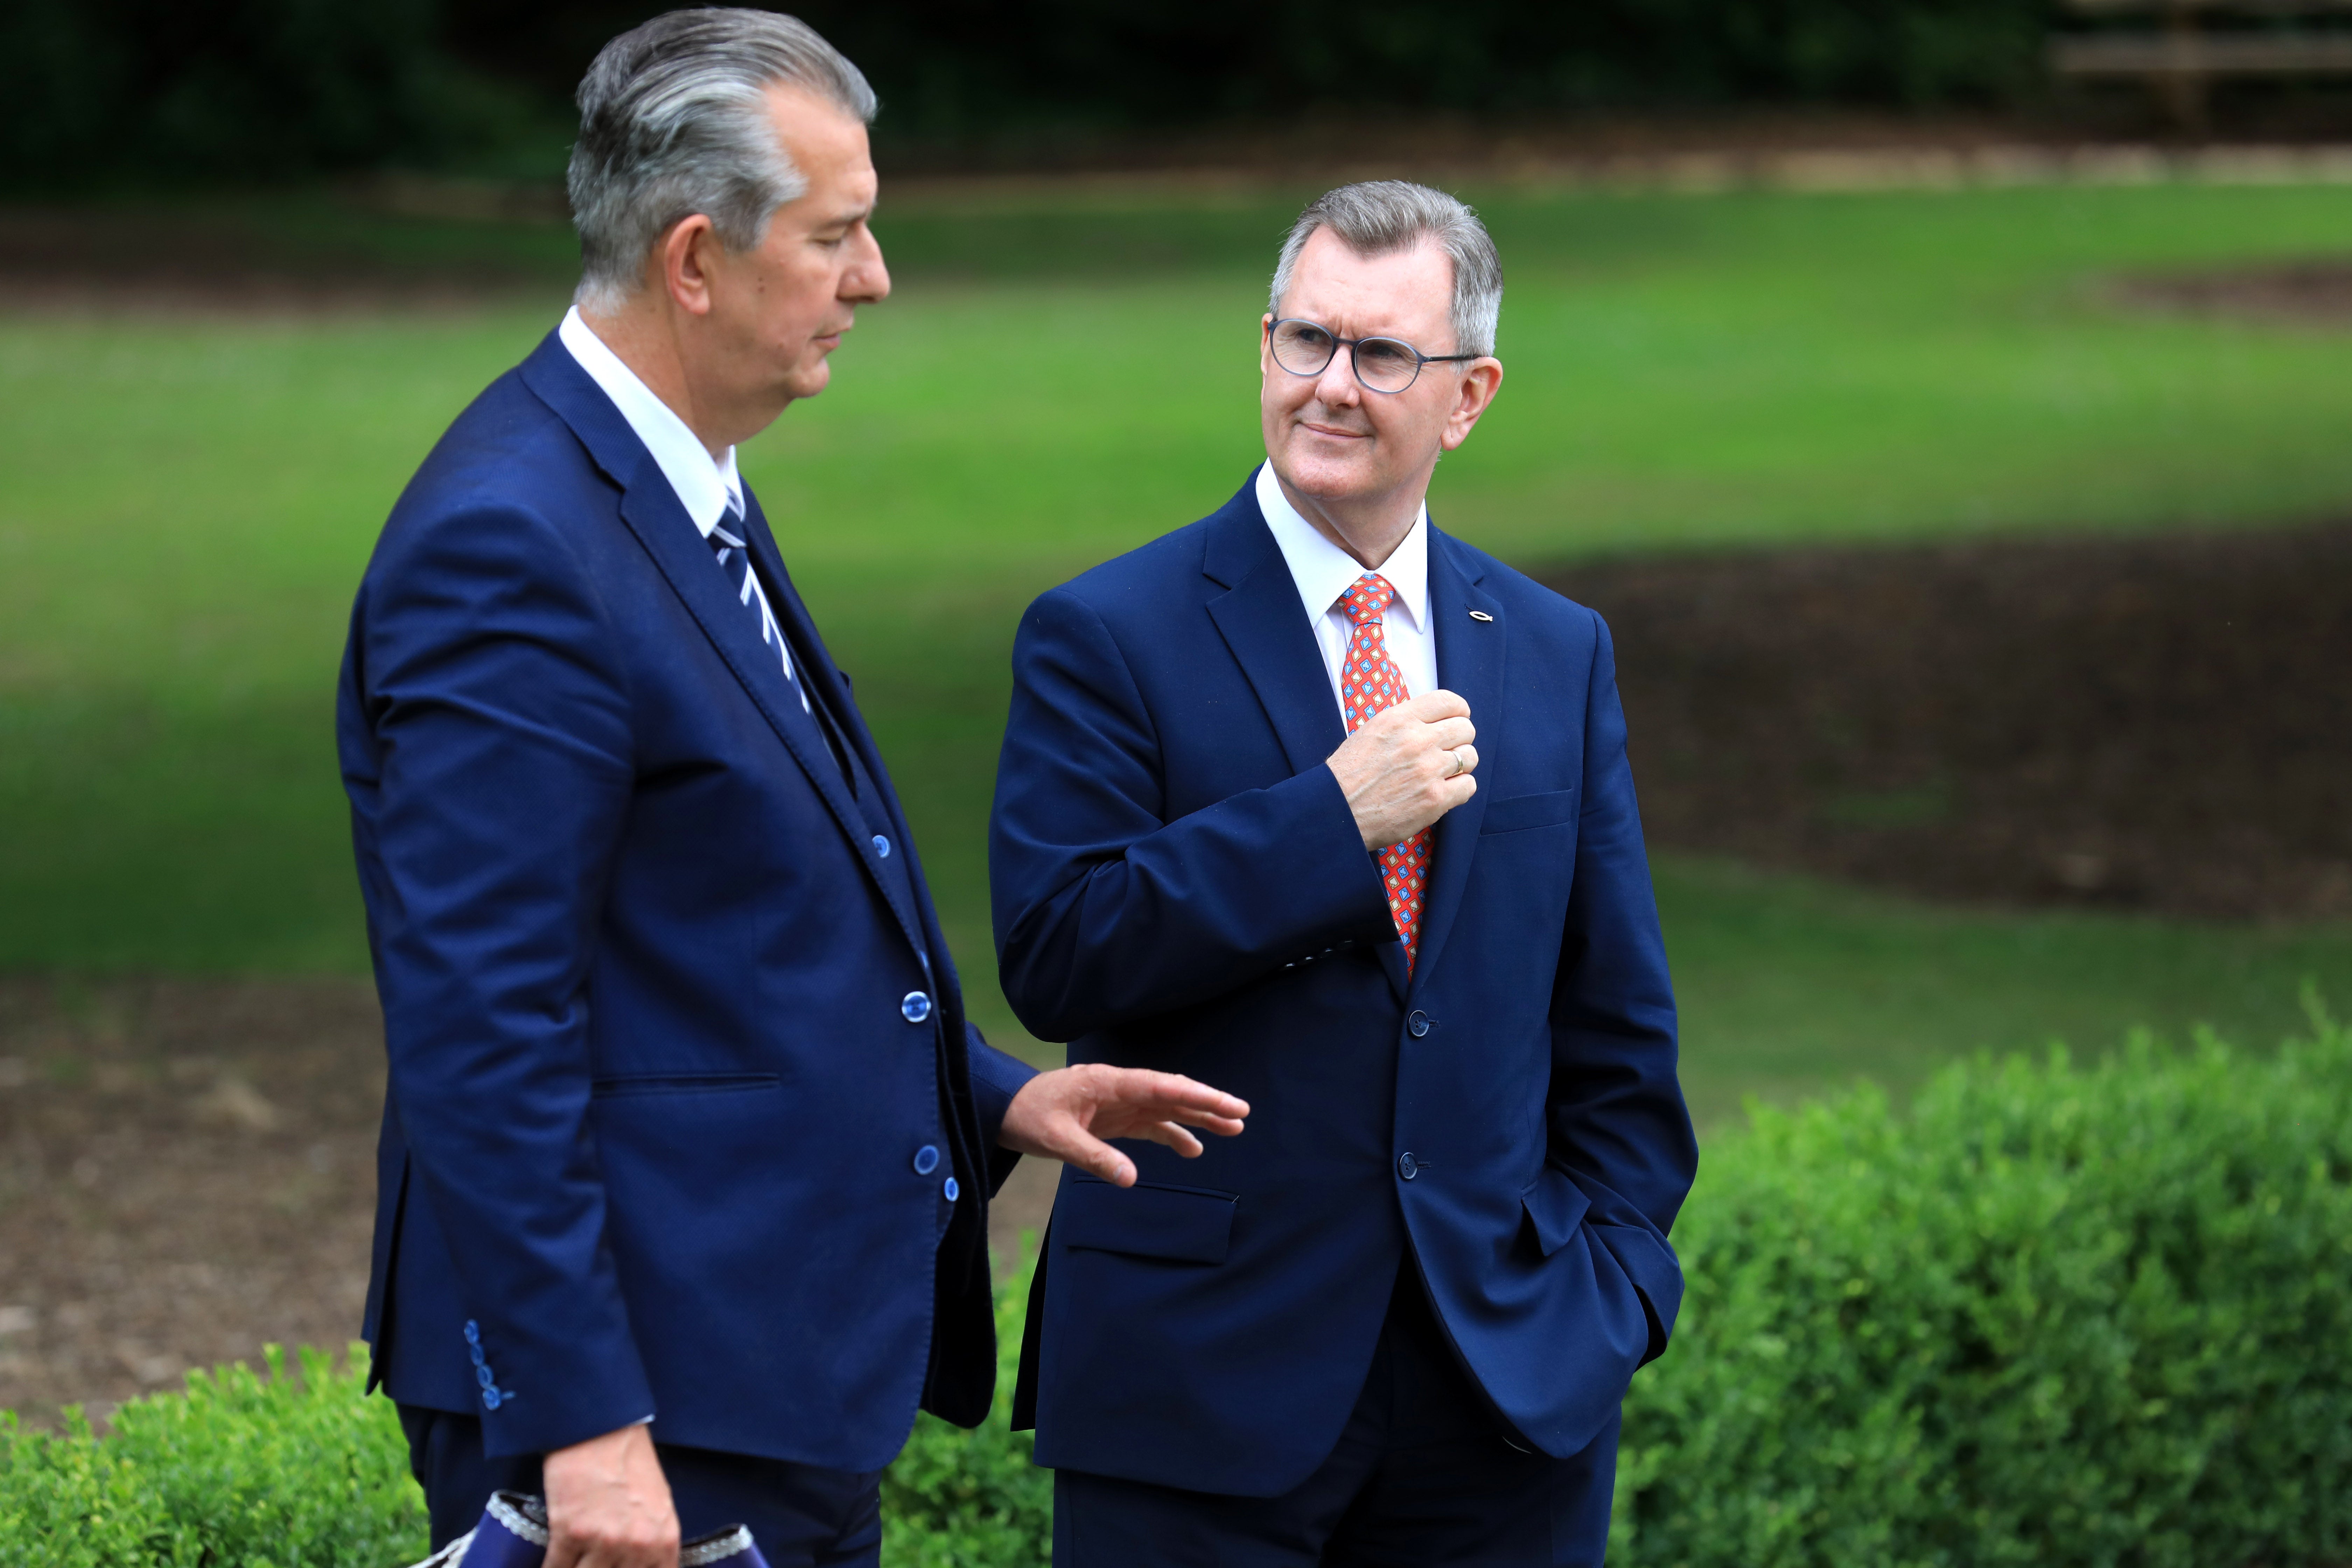 DUP leader Sir Jeffrey Donaldson (right) has denied that he encouraged party colleague Edwin Poots to run in South Down (Peter Morrison/PA)